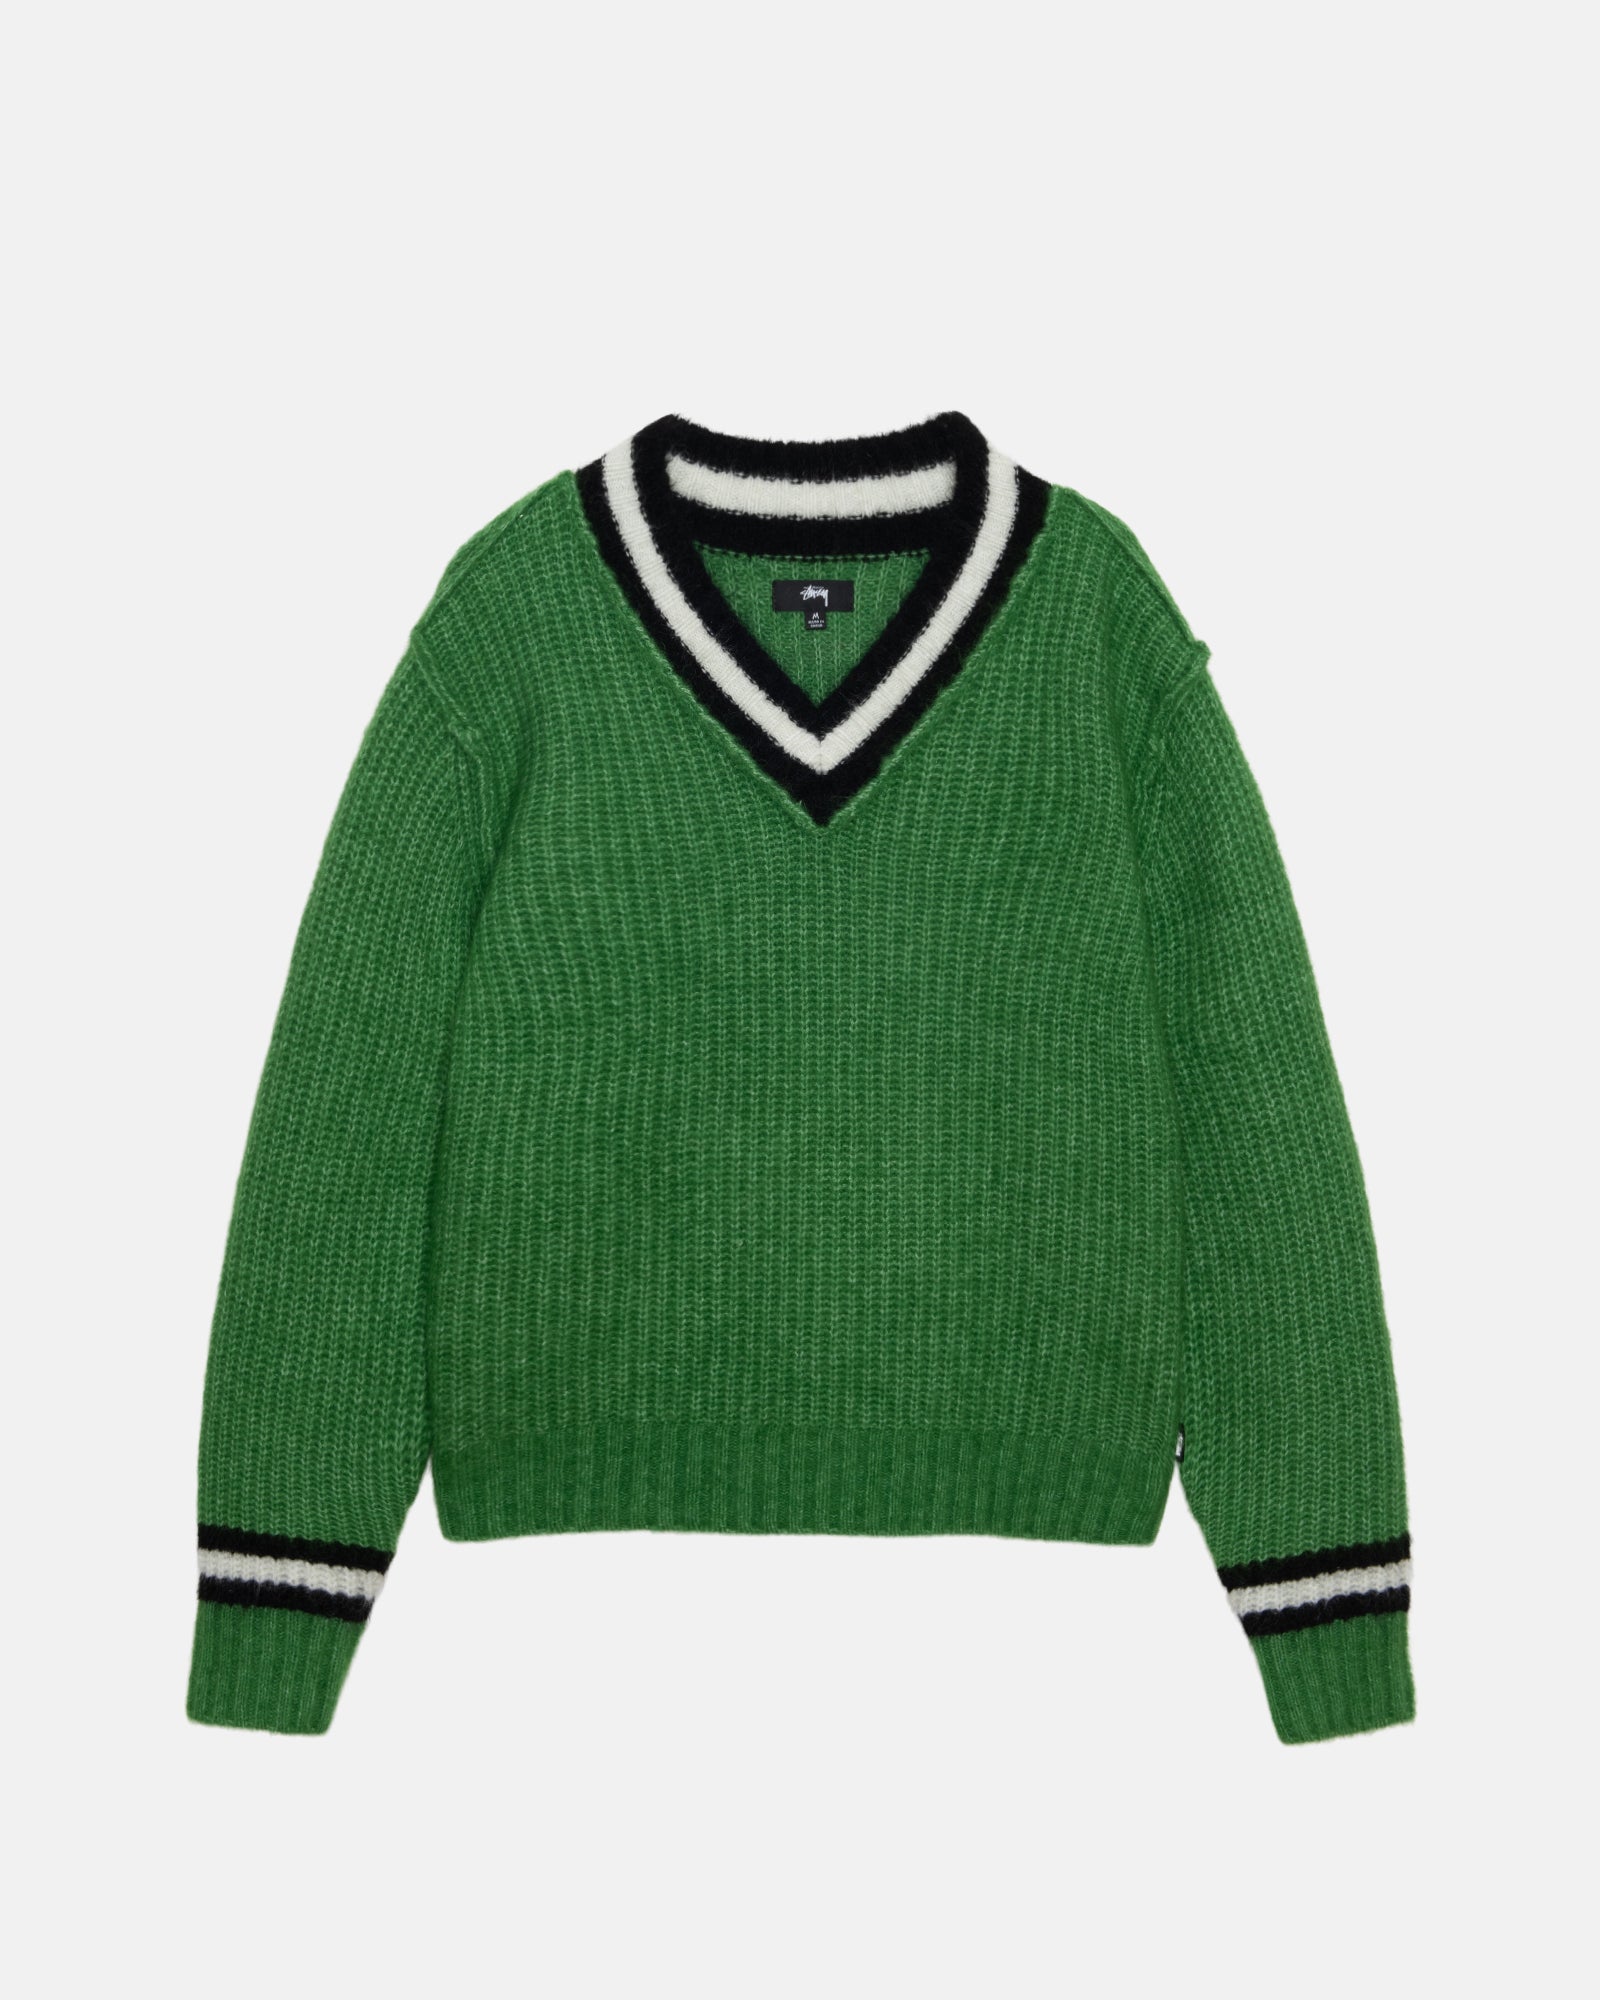 STUSSY MOHAIR TENNIS SWEATER 23aw